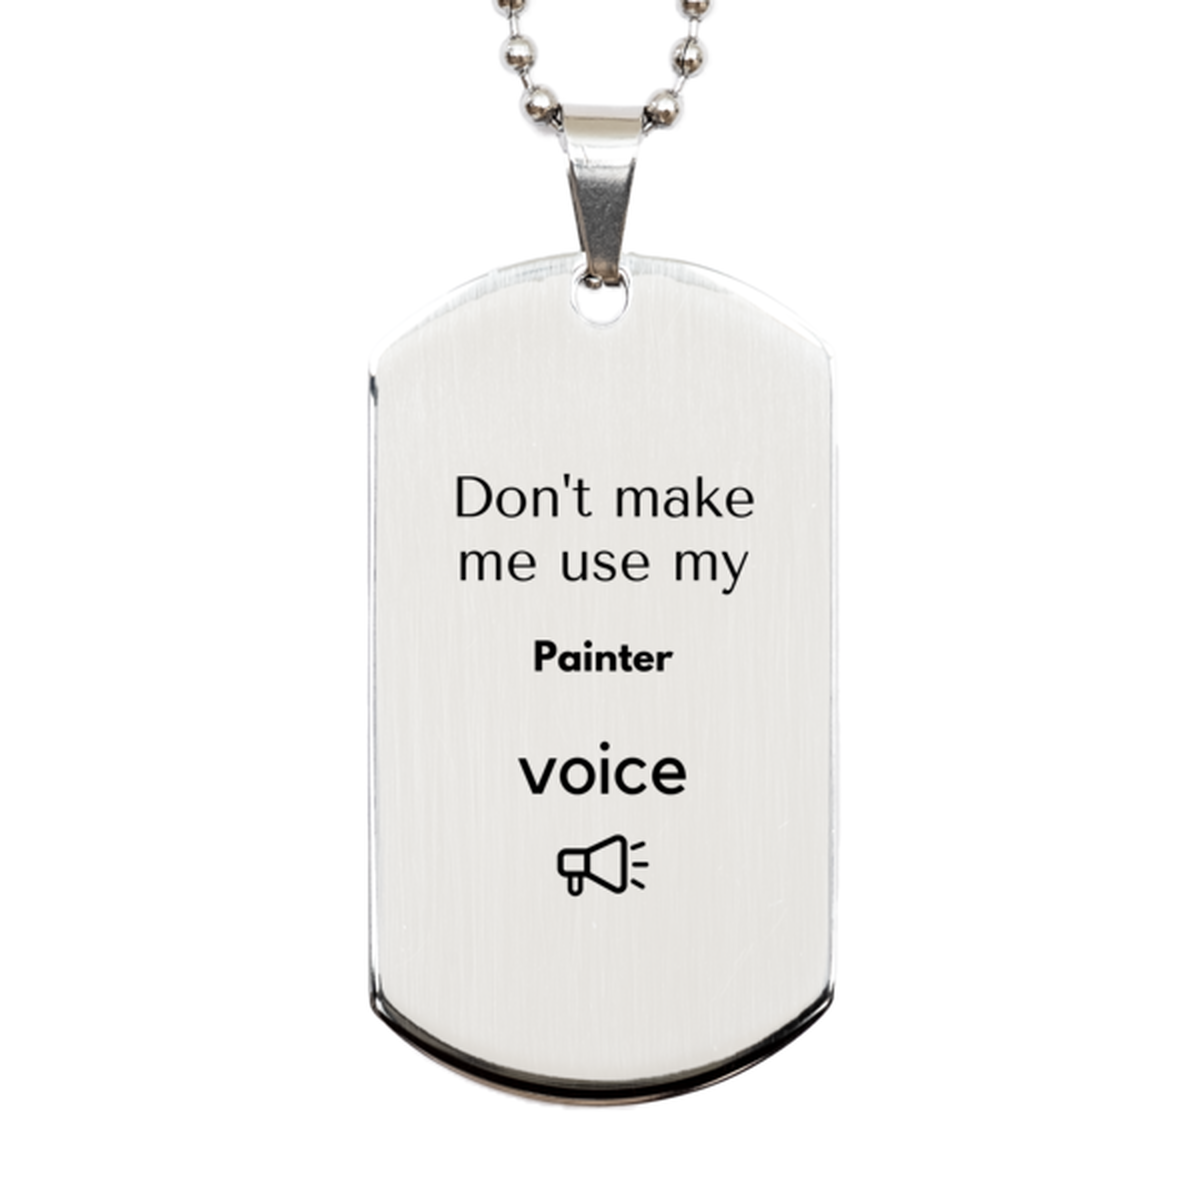 Don't make me use my Painter voice, Sarcasm Painter Gifts, Christmas Painter Silver Dog Tag Birthday Unique Gifts For Painter Coworkers, Men, Women, Colleague, Friends